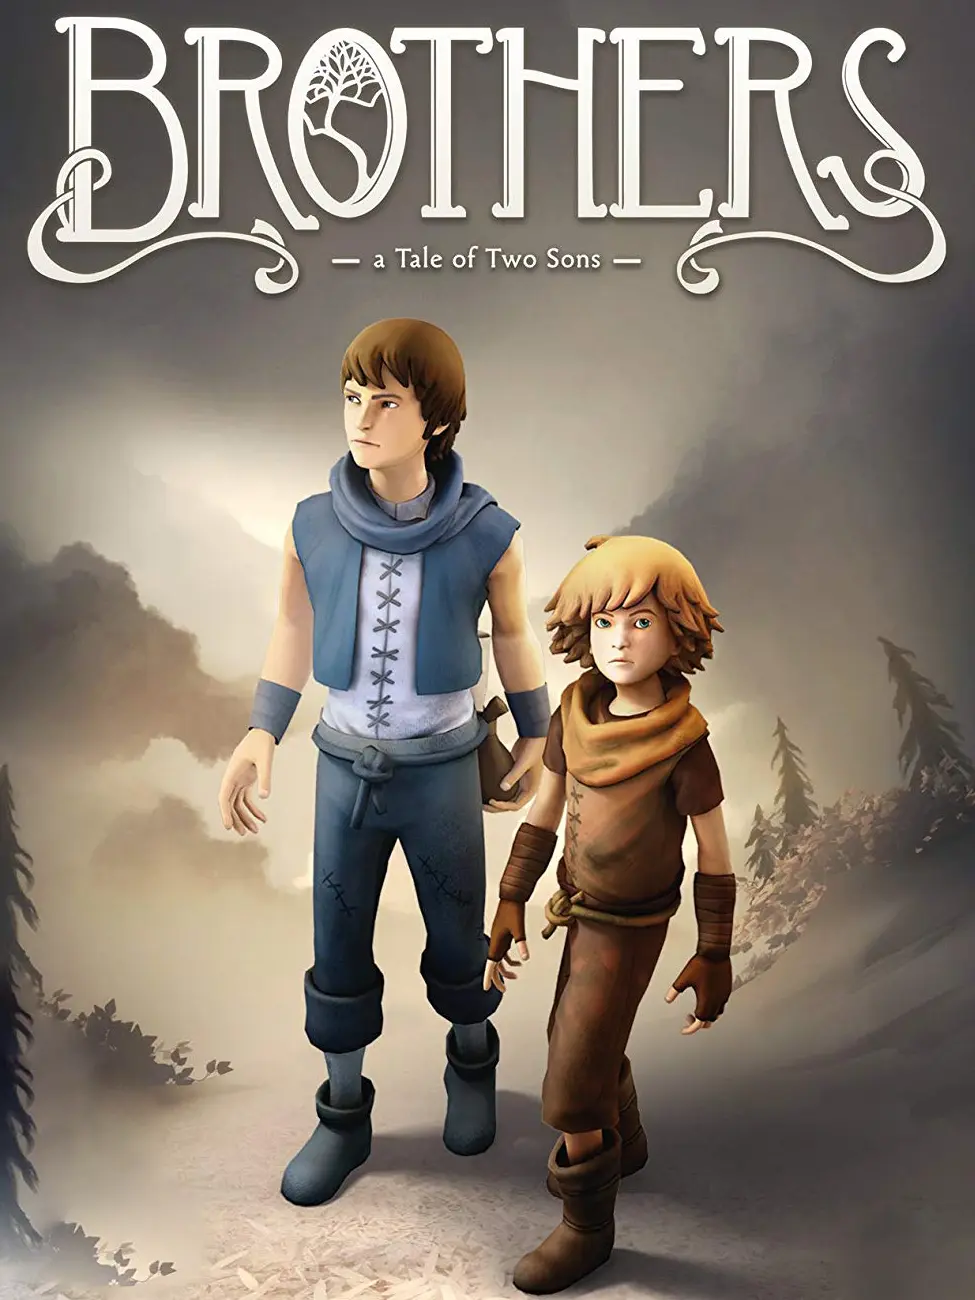 Brothers - A Tale of Two Sons (PC) - Steam - Digital Code